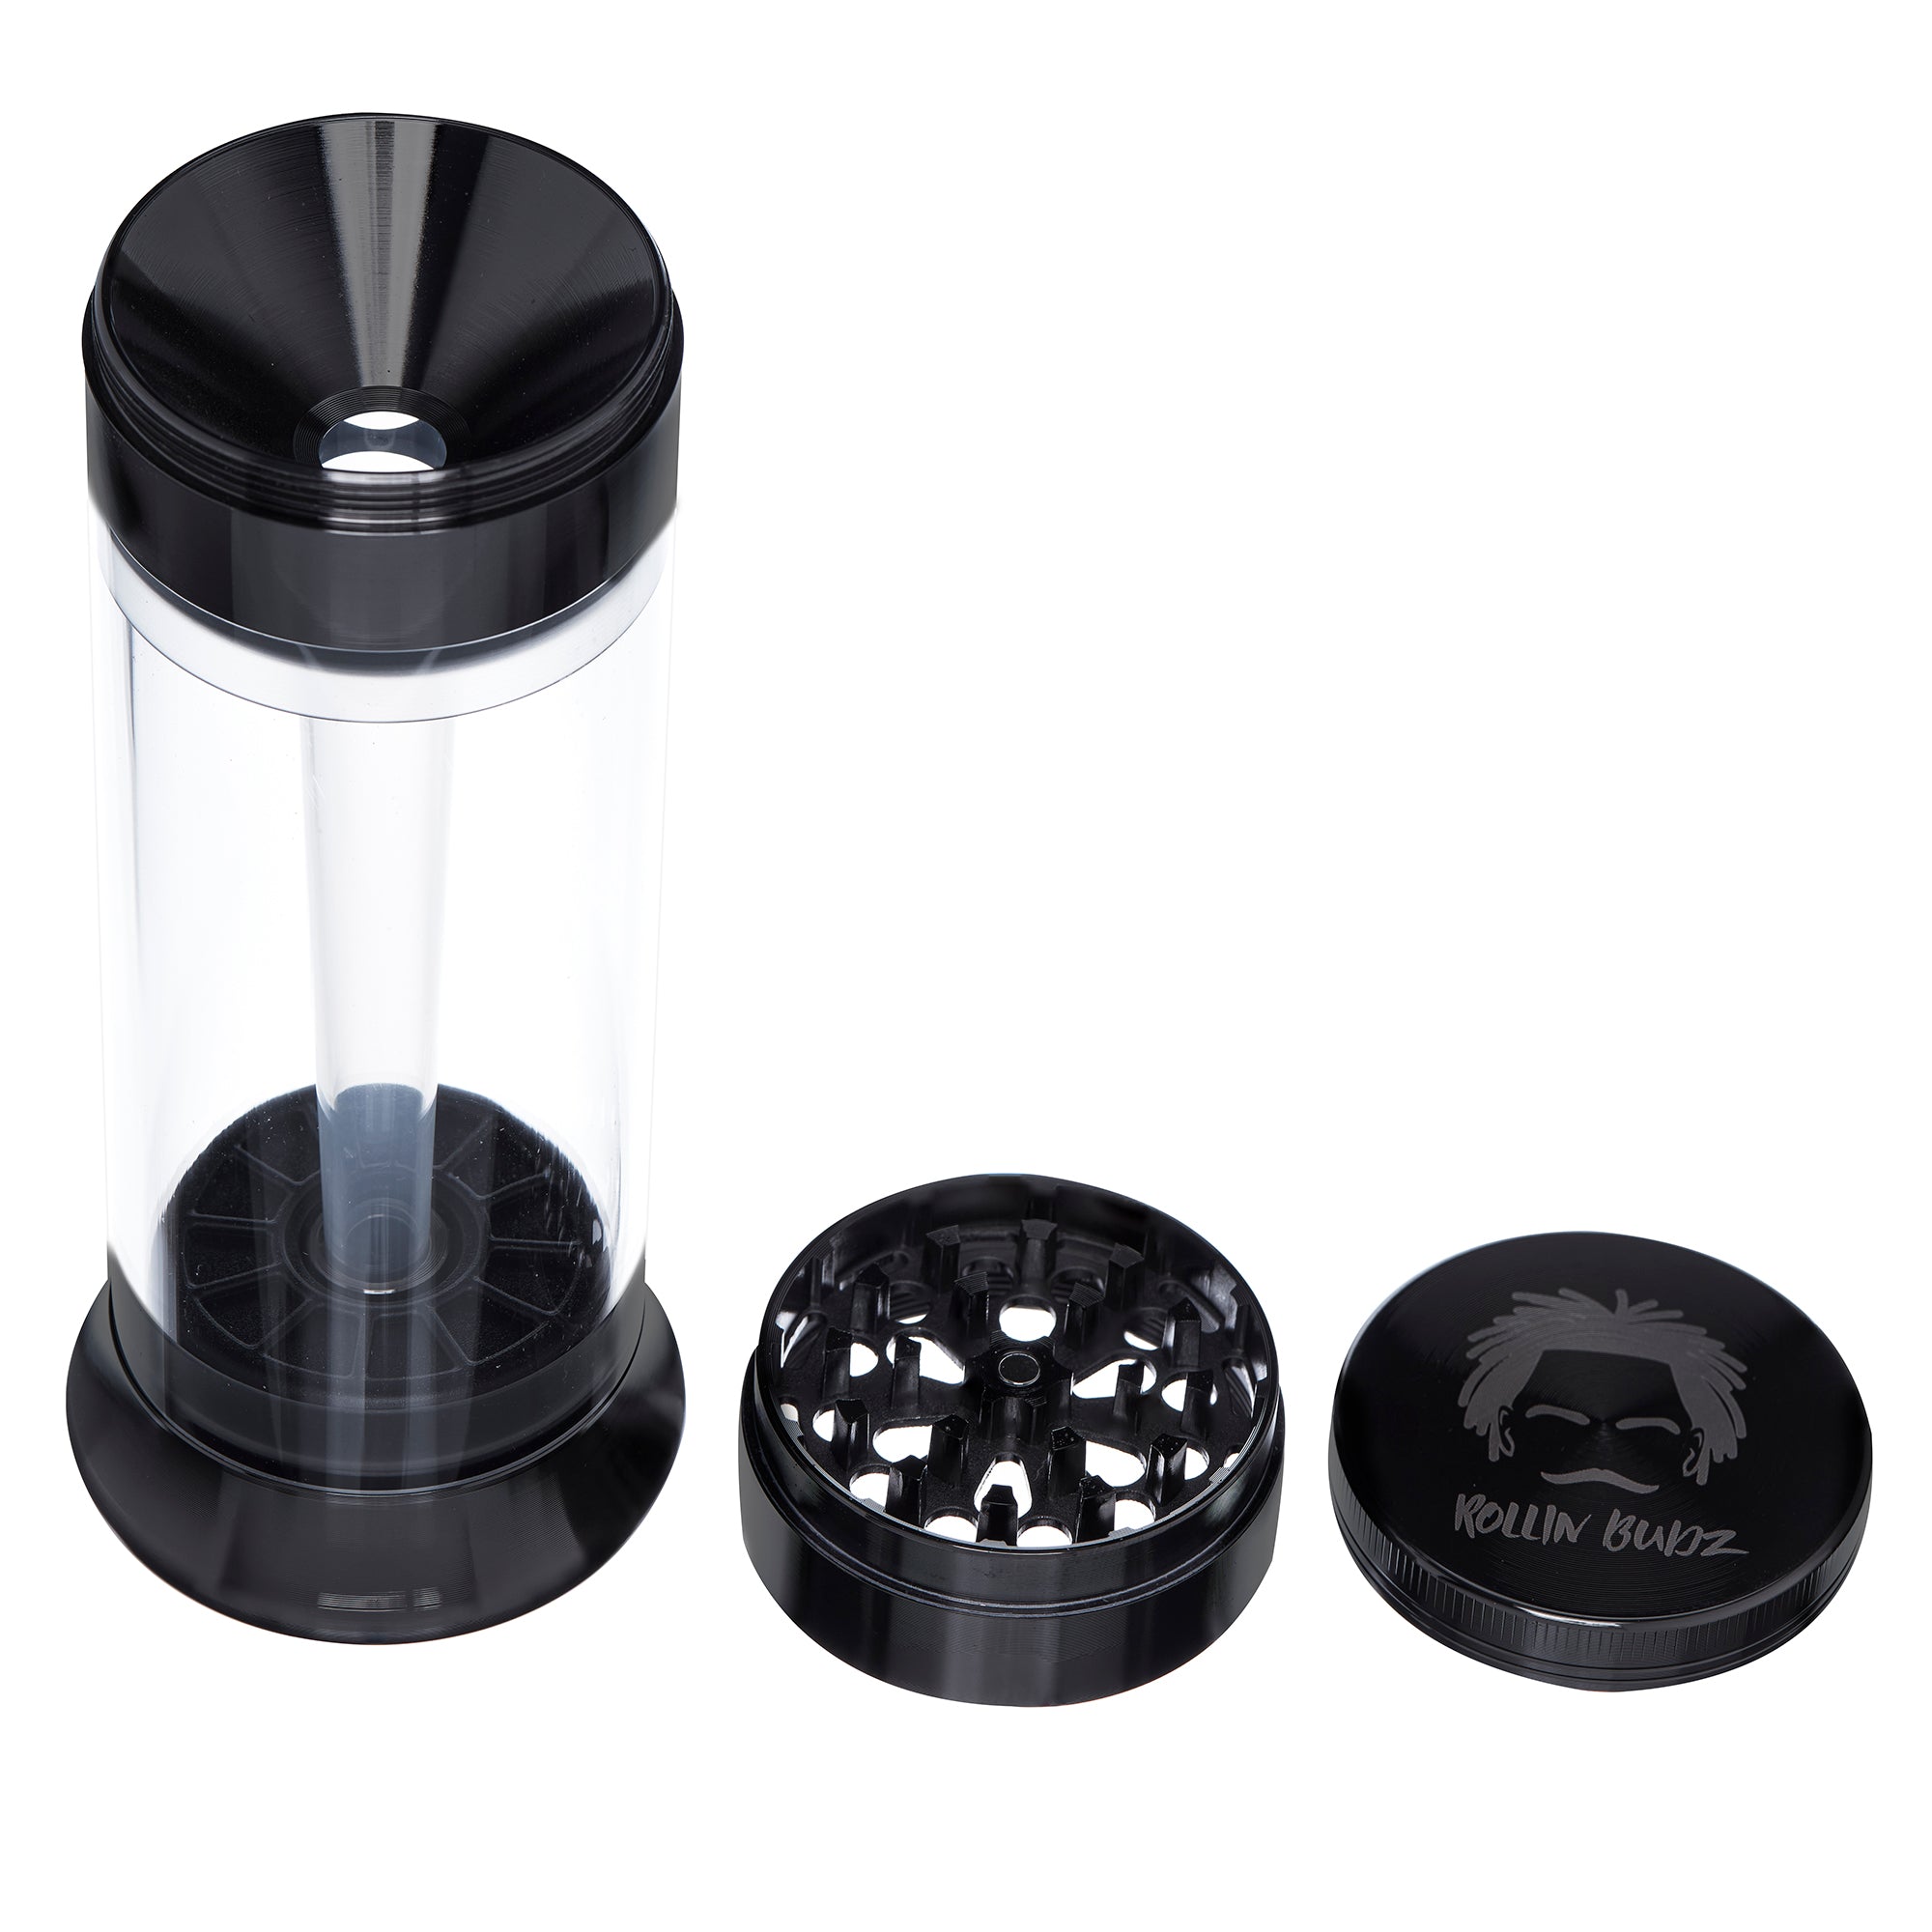 All in One Grinder & Cone Filler